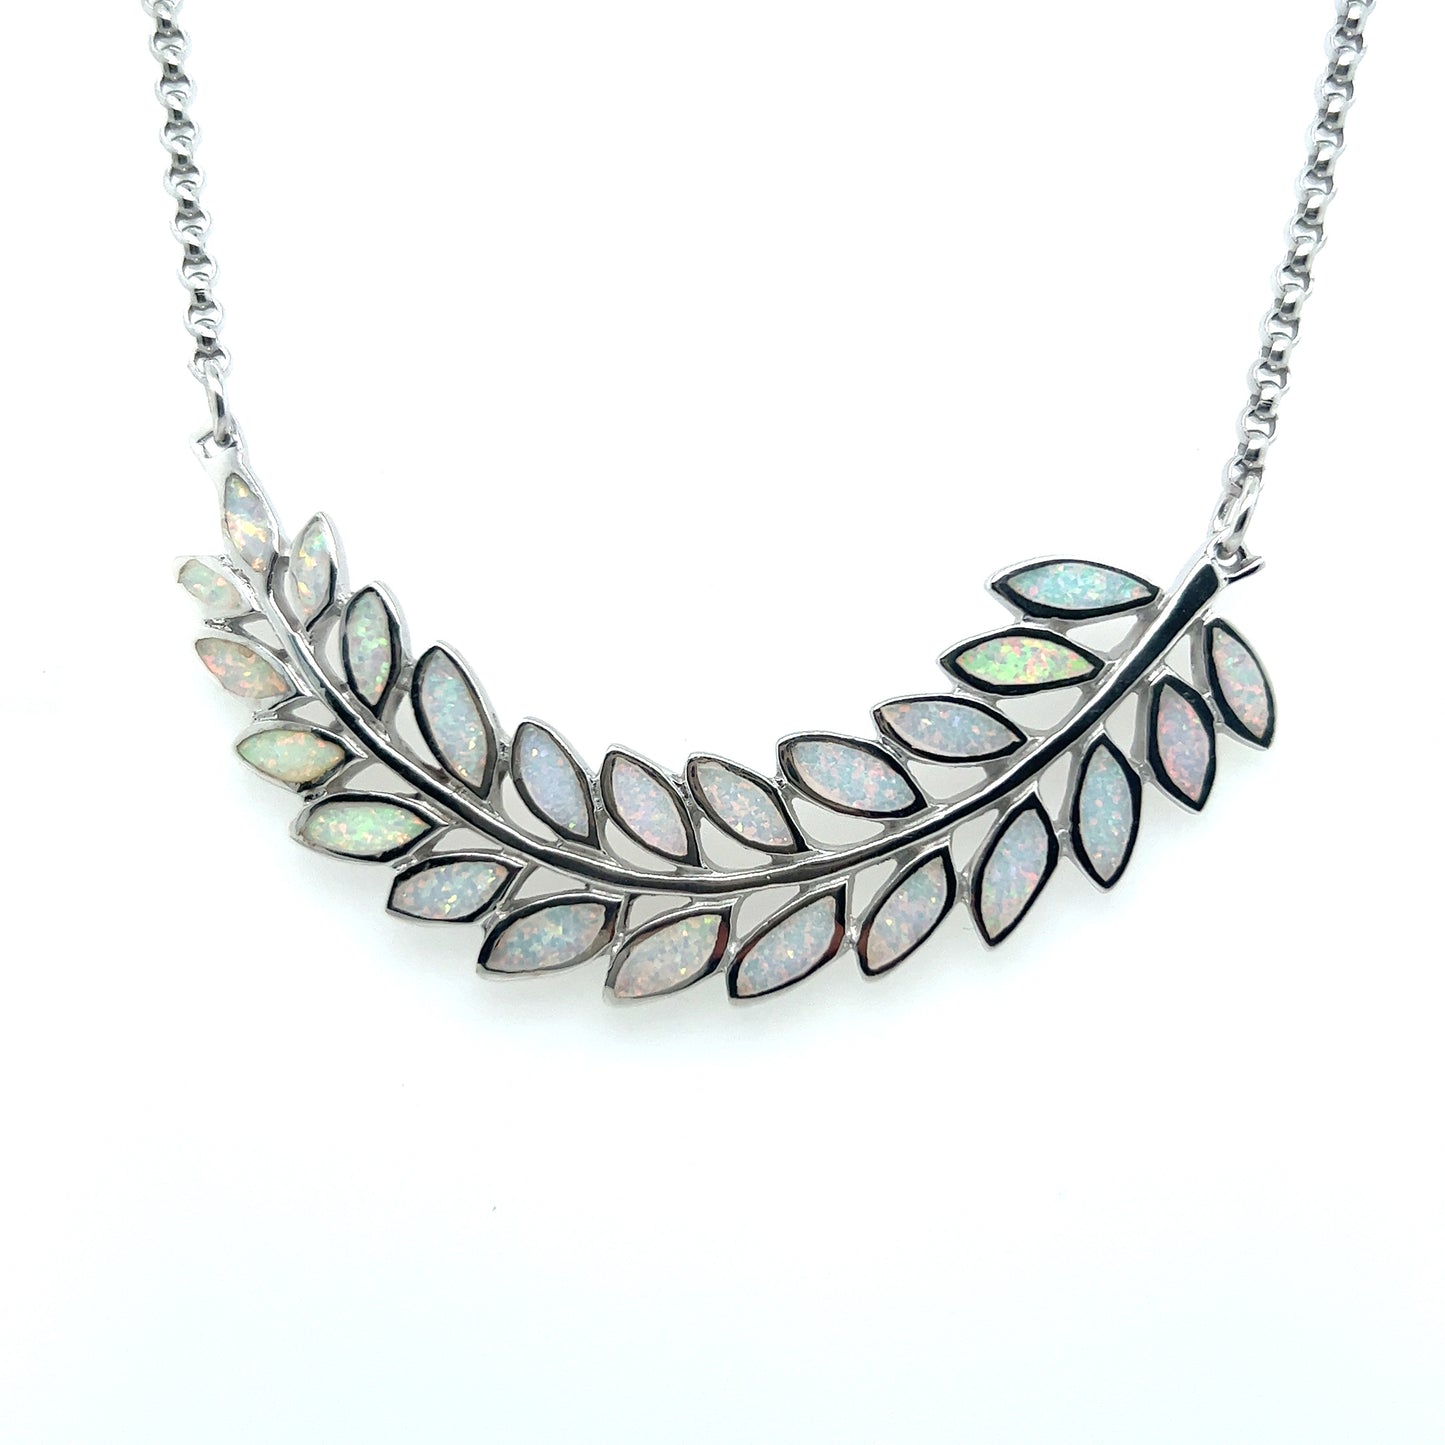 A Super Silver Stunning Opal Branch Necklace with a branch design on a silver chain.